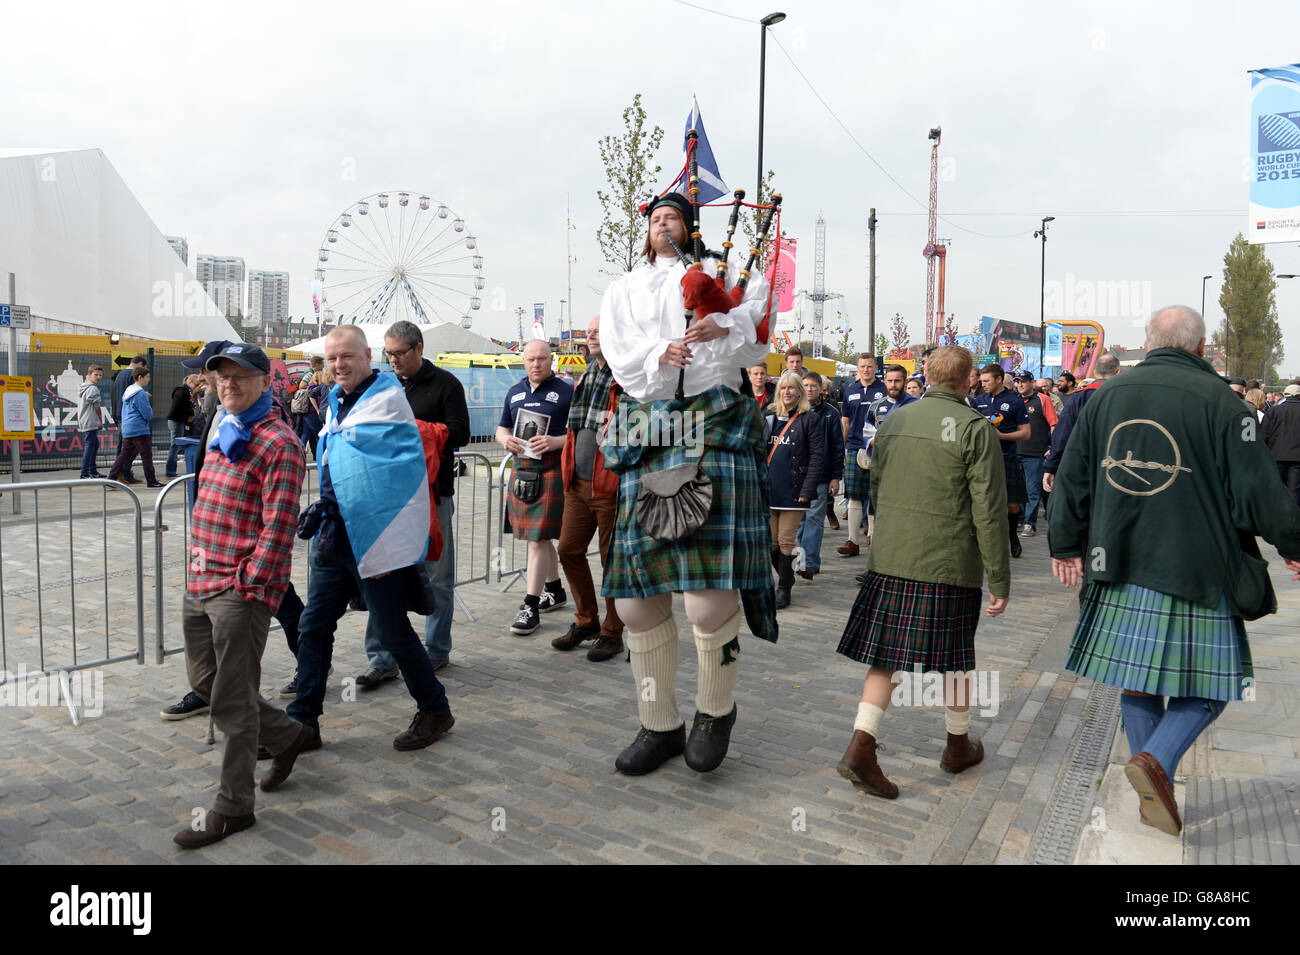 A bagpiper plays outside the fanzone in Newcastle ahead of the World Cup Match at St James' Park, Newcastle. Stock Photo